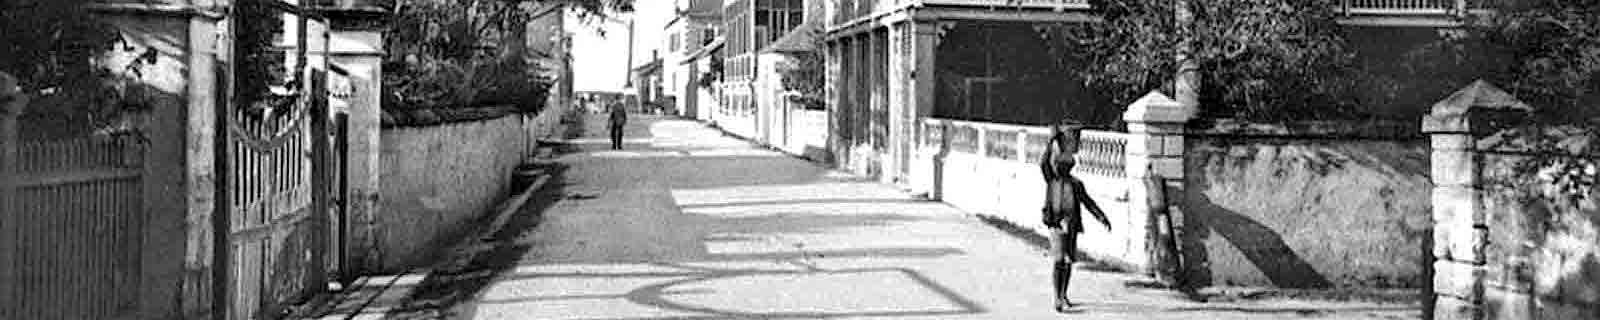 Old black and white photo of East Street in Nassau cruise port